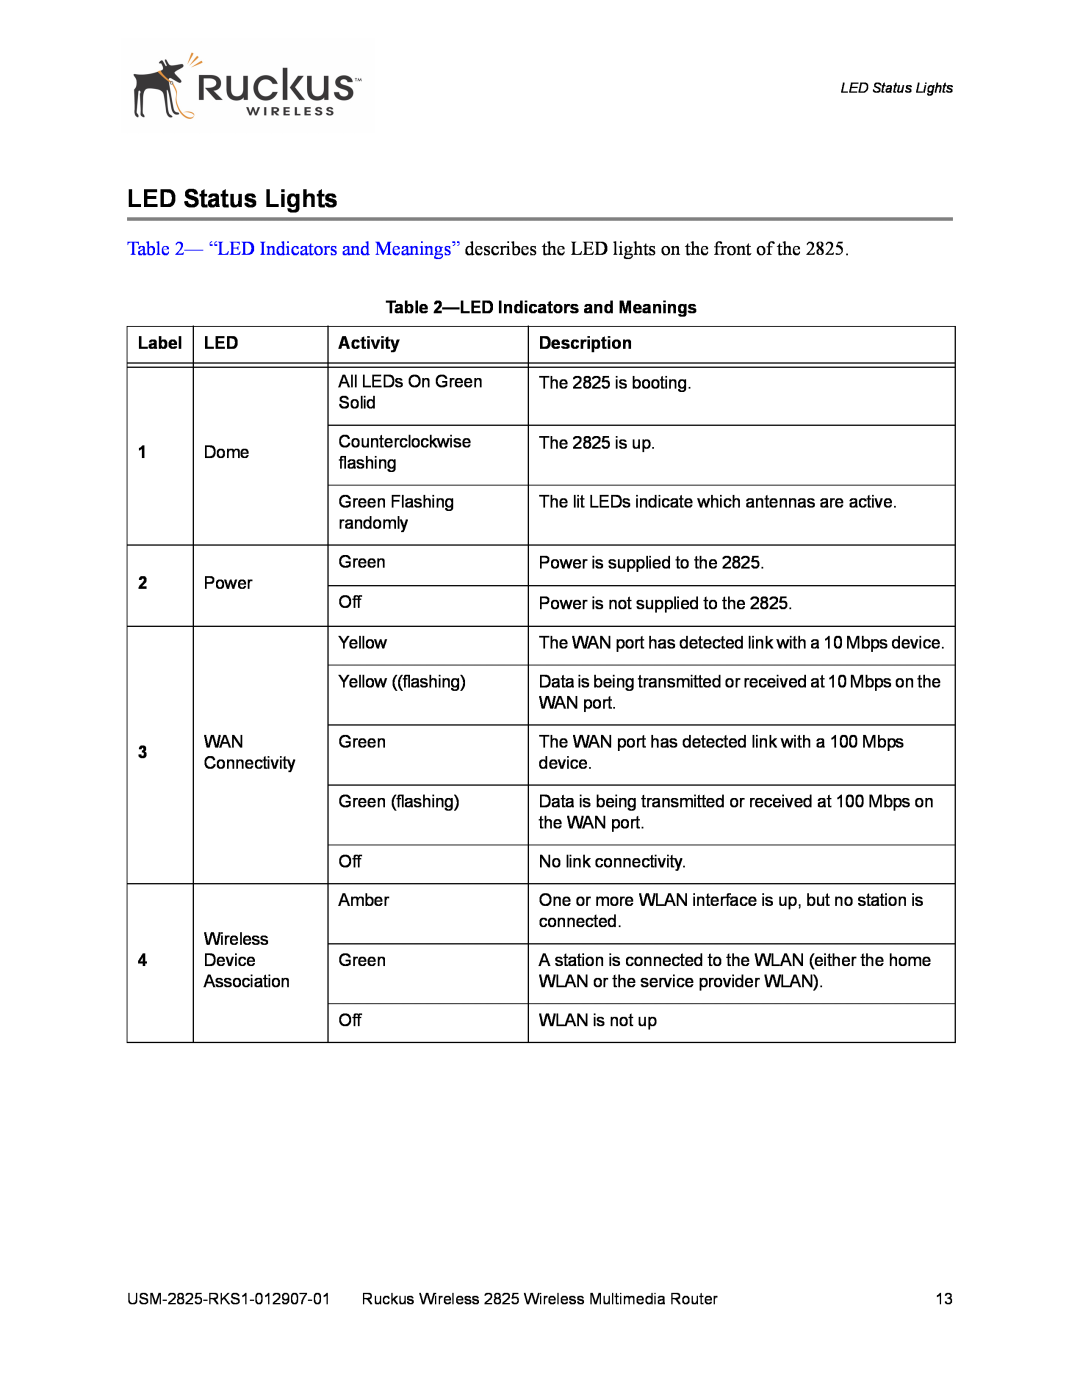 Ruckus Wireless 2111, 2825 manual LED Status Lights, LED Indicators and Meanings, Label, Activity, Description 